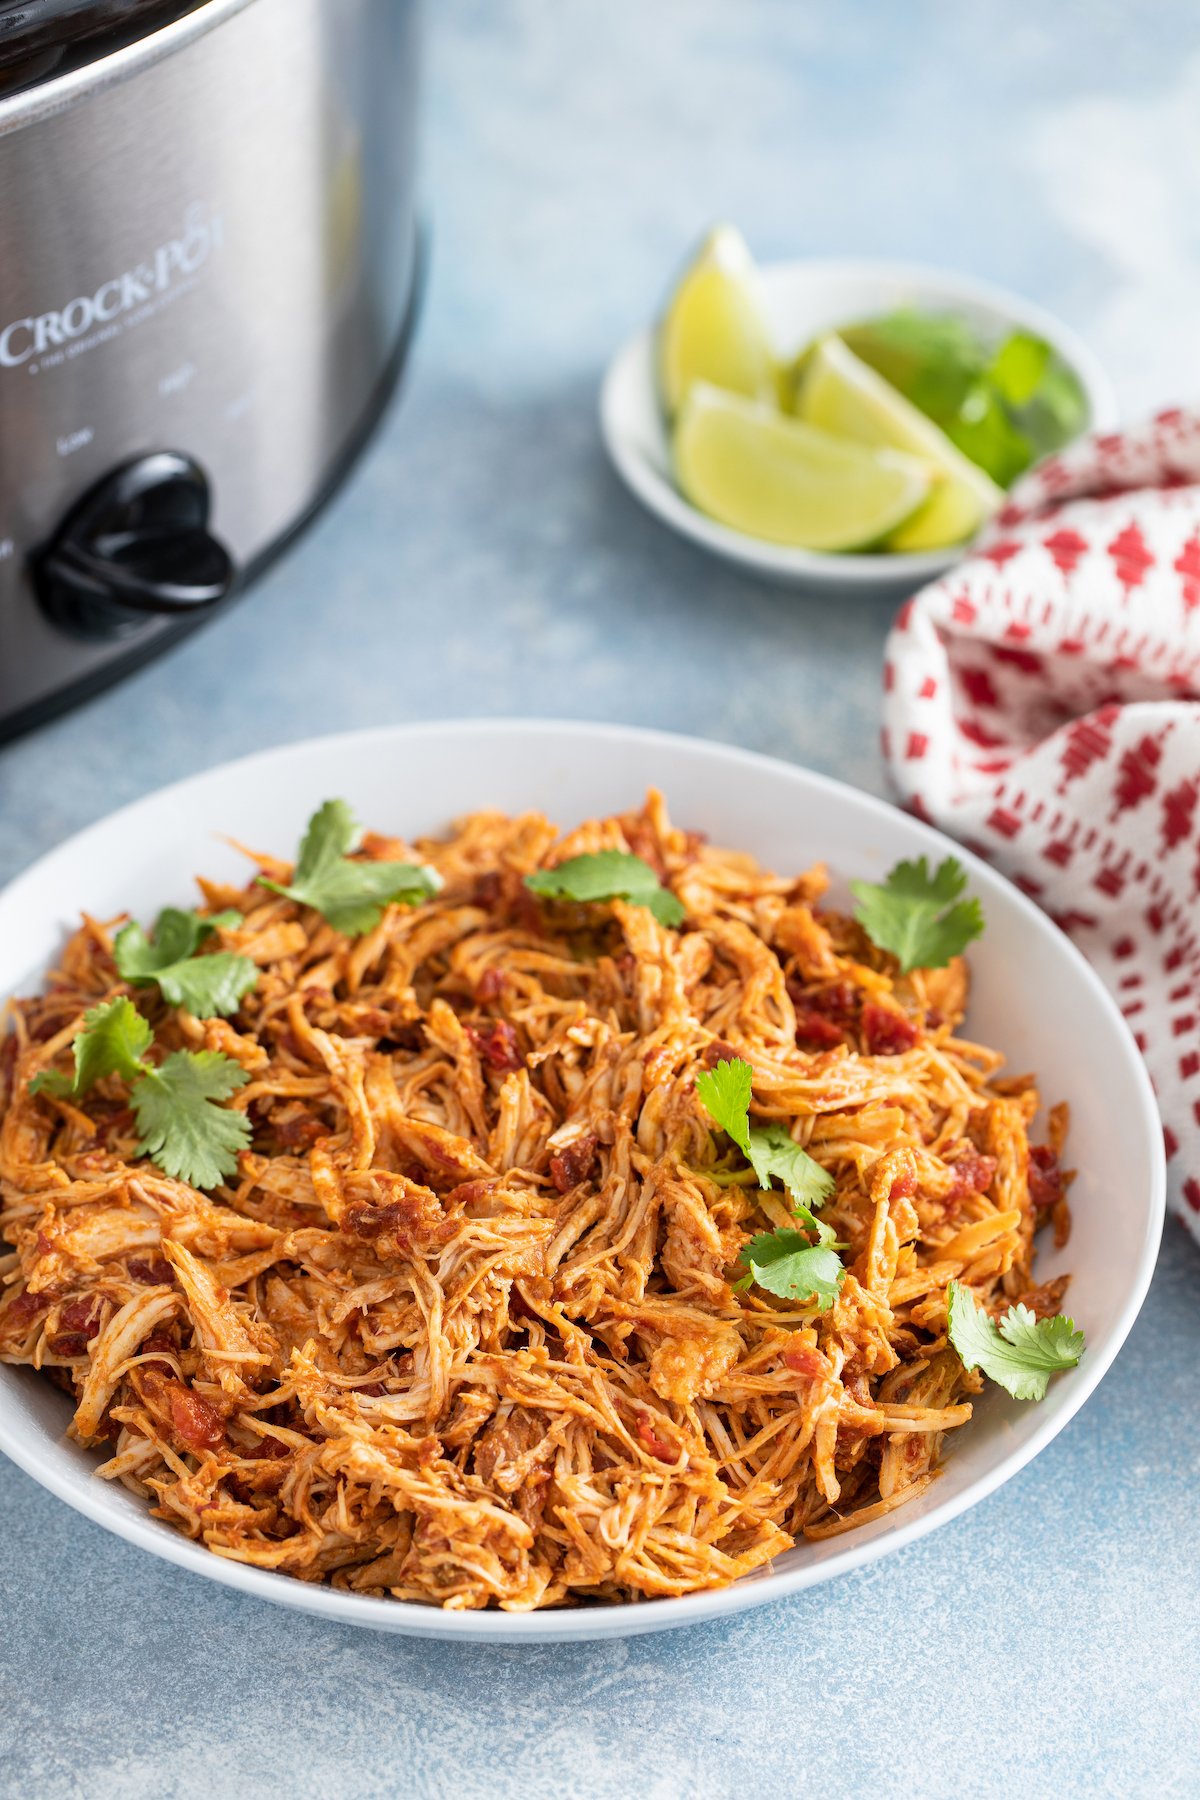 A bowl of shredded chicken next to a slow cooker and plate of lime wedges.